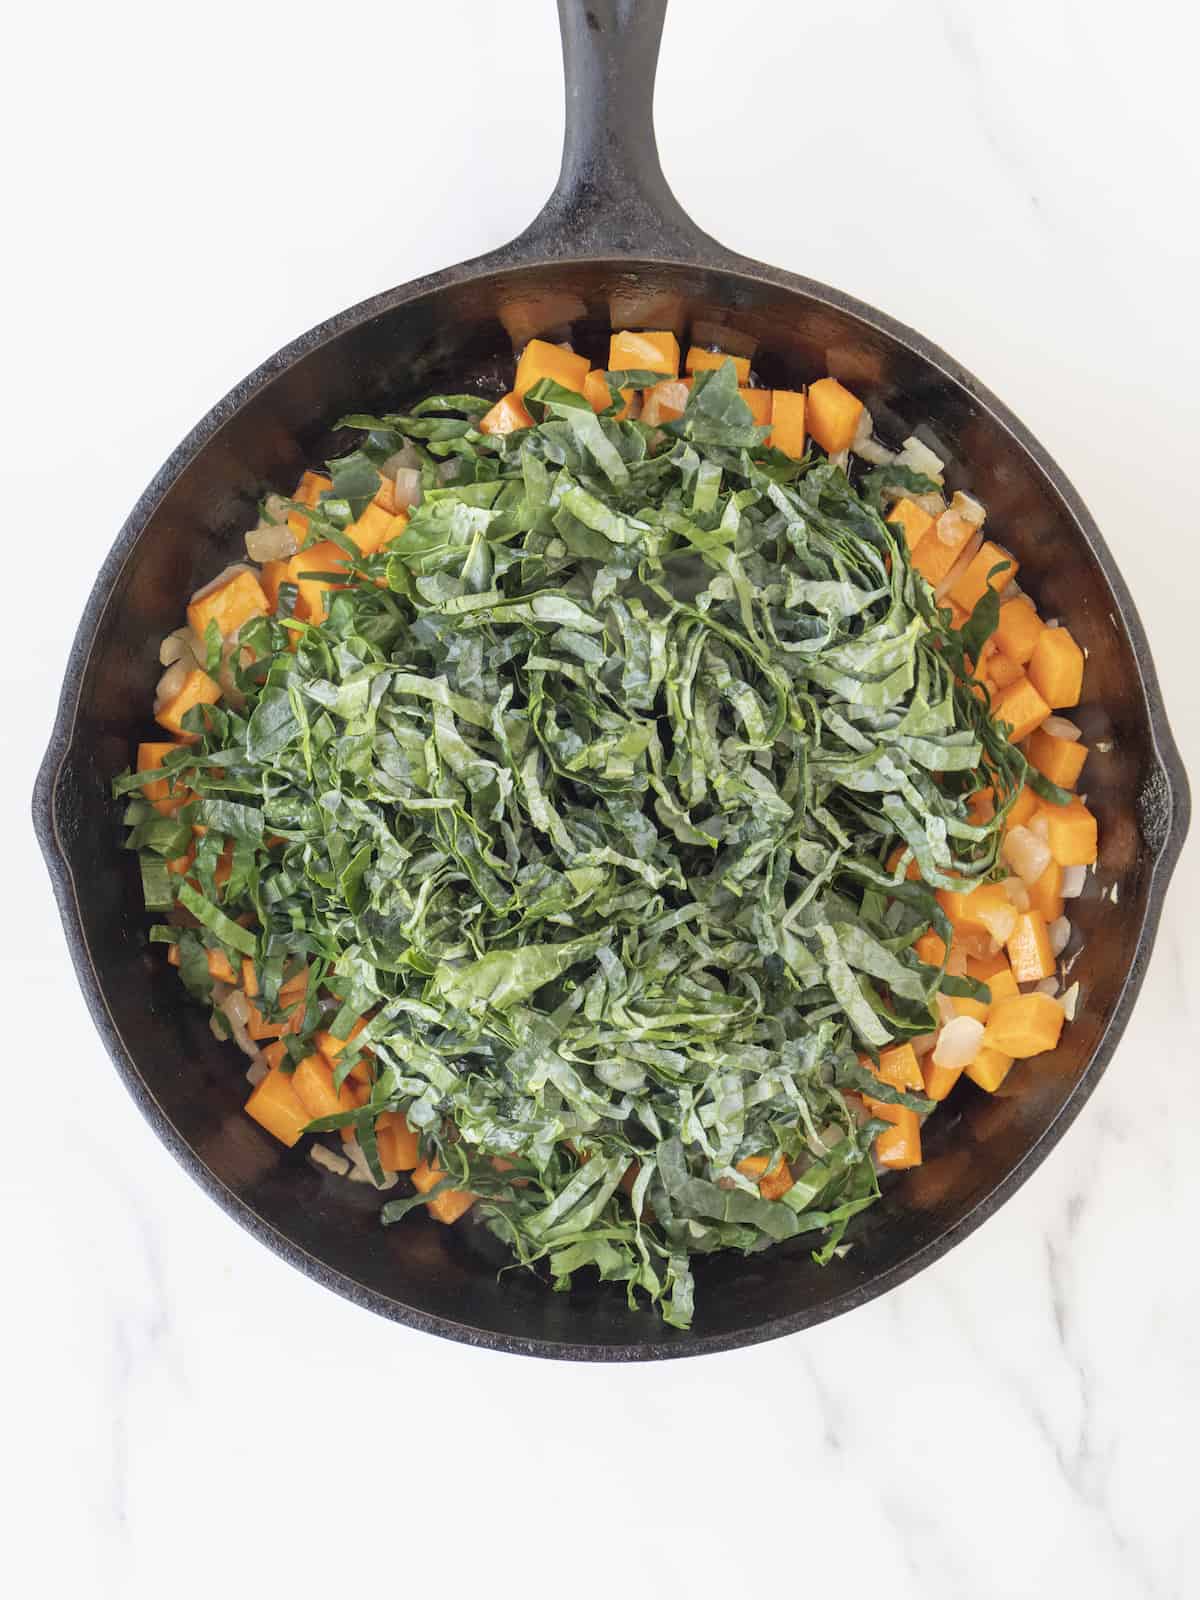 A skillet with cooked onions and sweet potatoes, topped with shredded kale and cooked down.